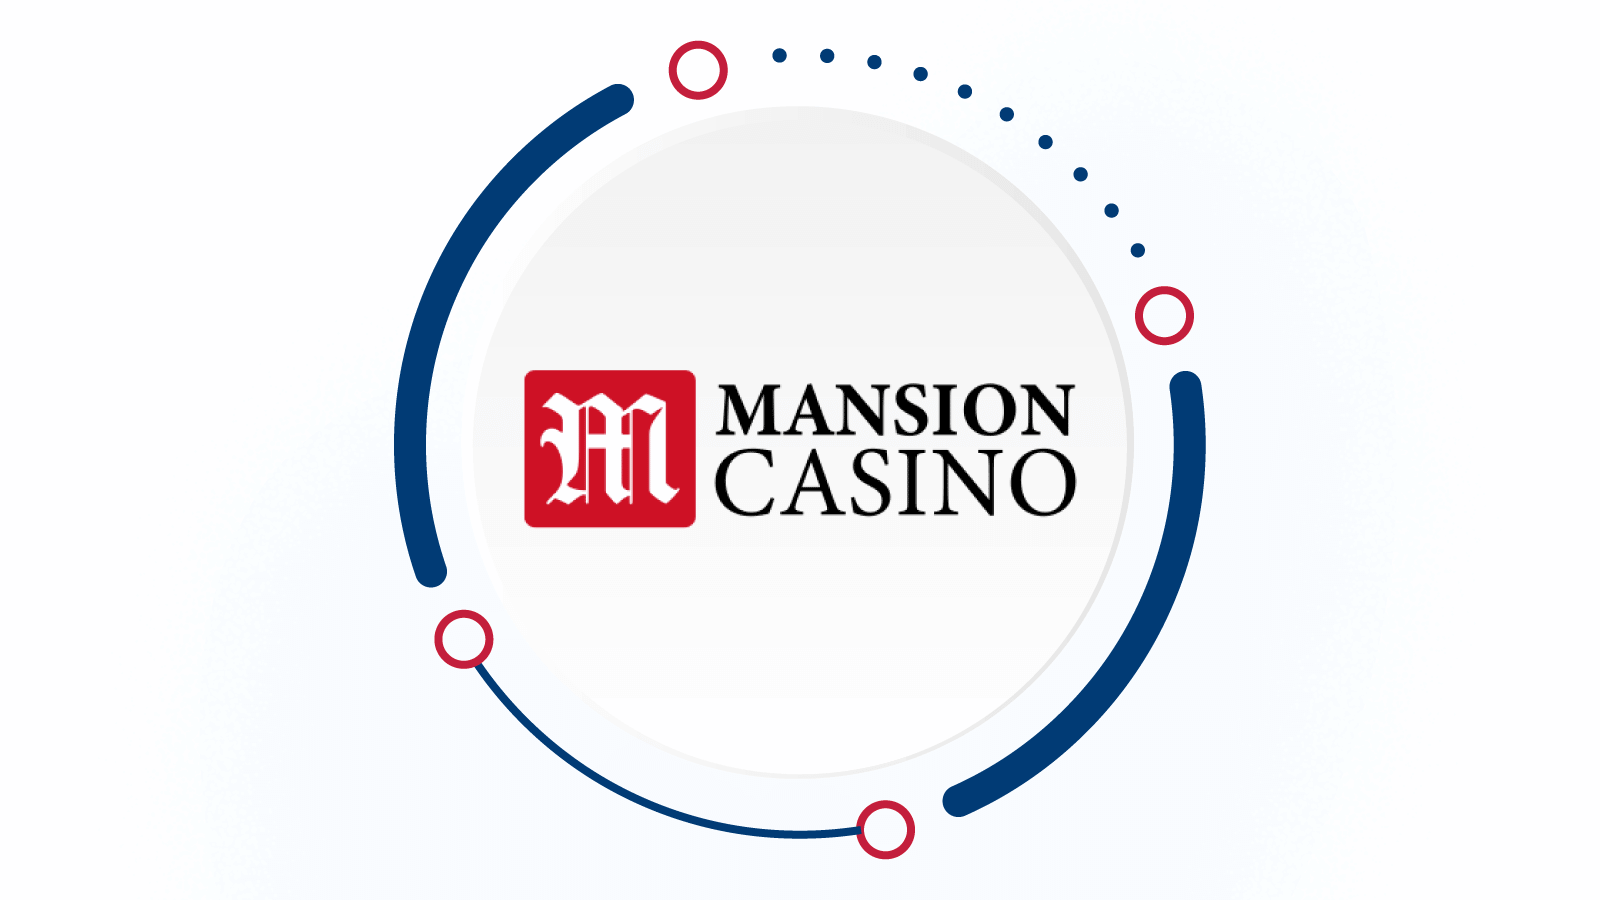 Short Mansion Casino Review